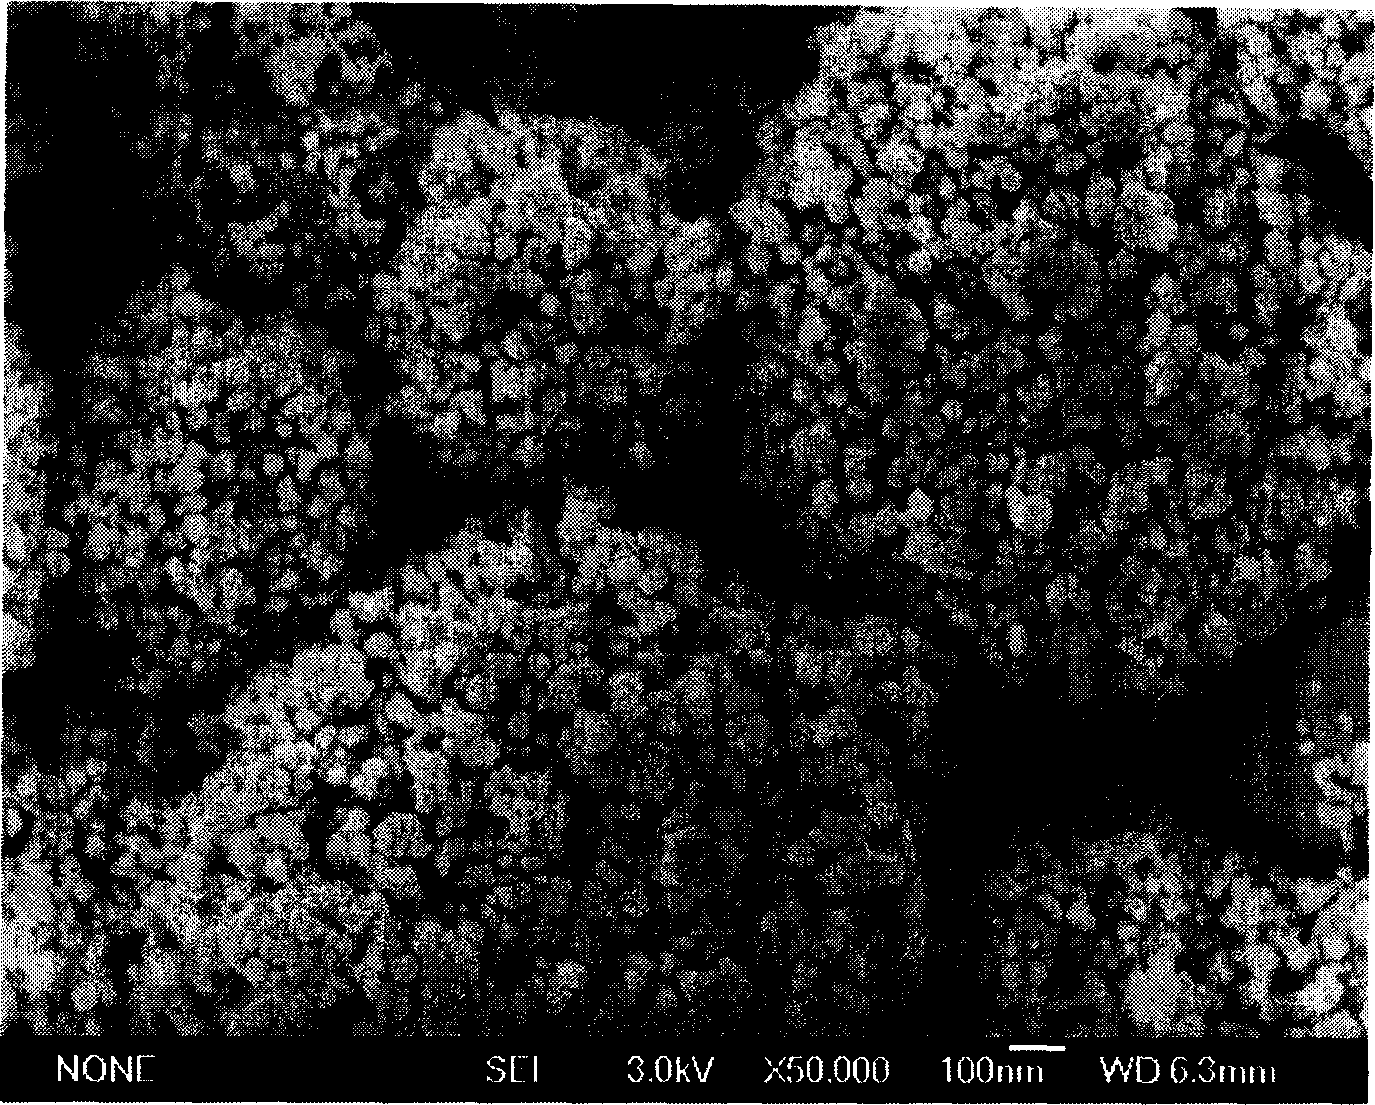 Method for forming nano TiO2 light catalystic active agenbt coating on substrate